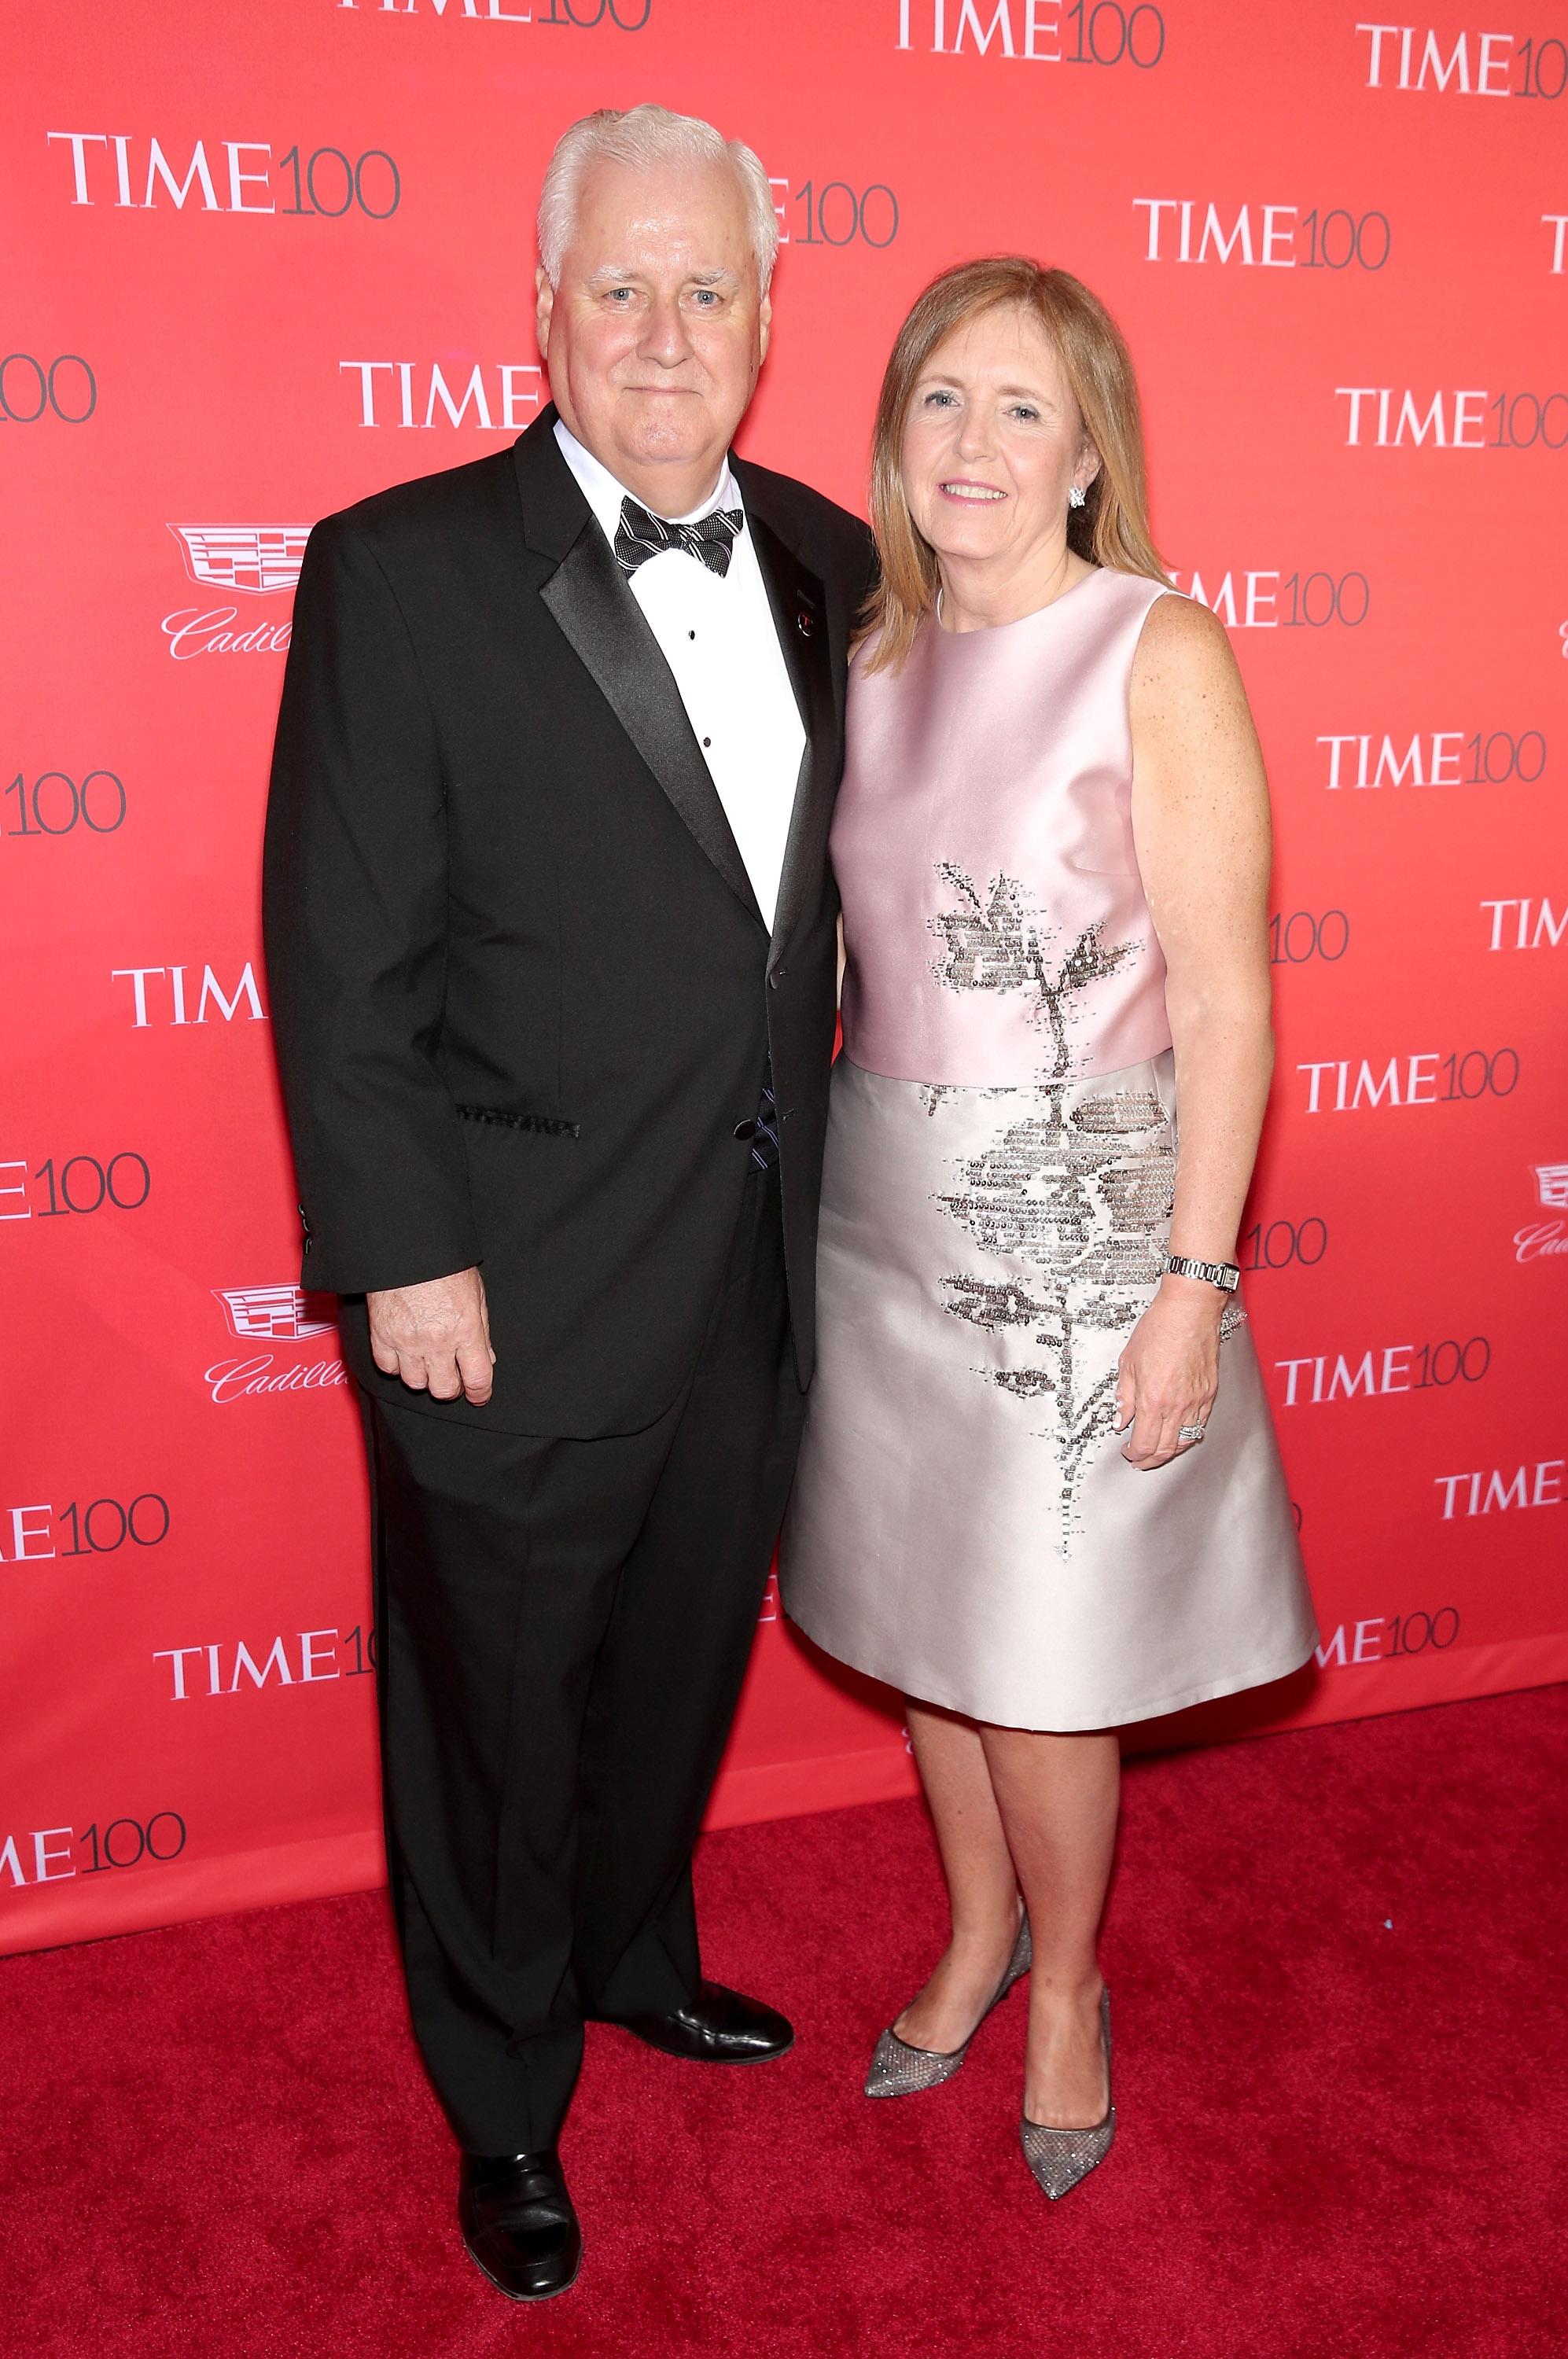 TIME Inc. CEO Joseph Ripp and Ginny Ripp  at the TIME 100 gala in New York on April 26, 2016.